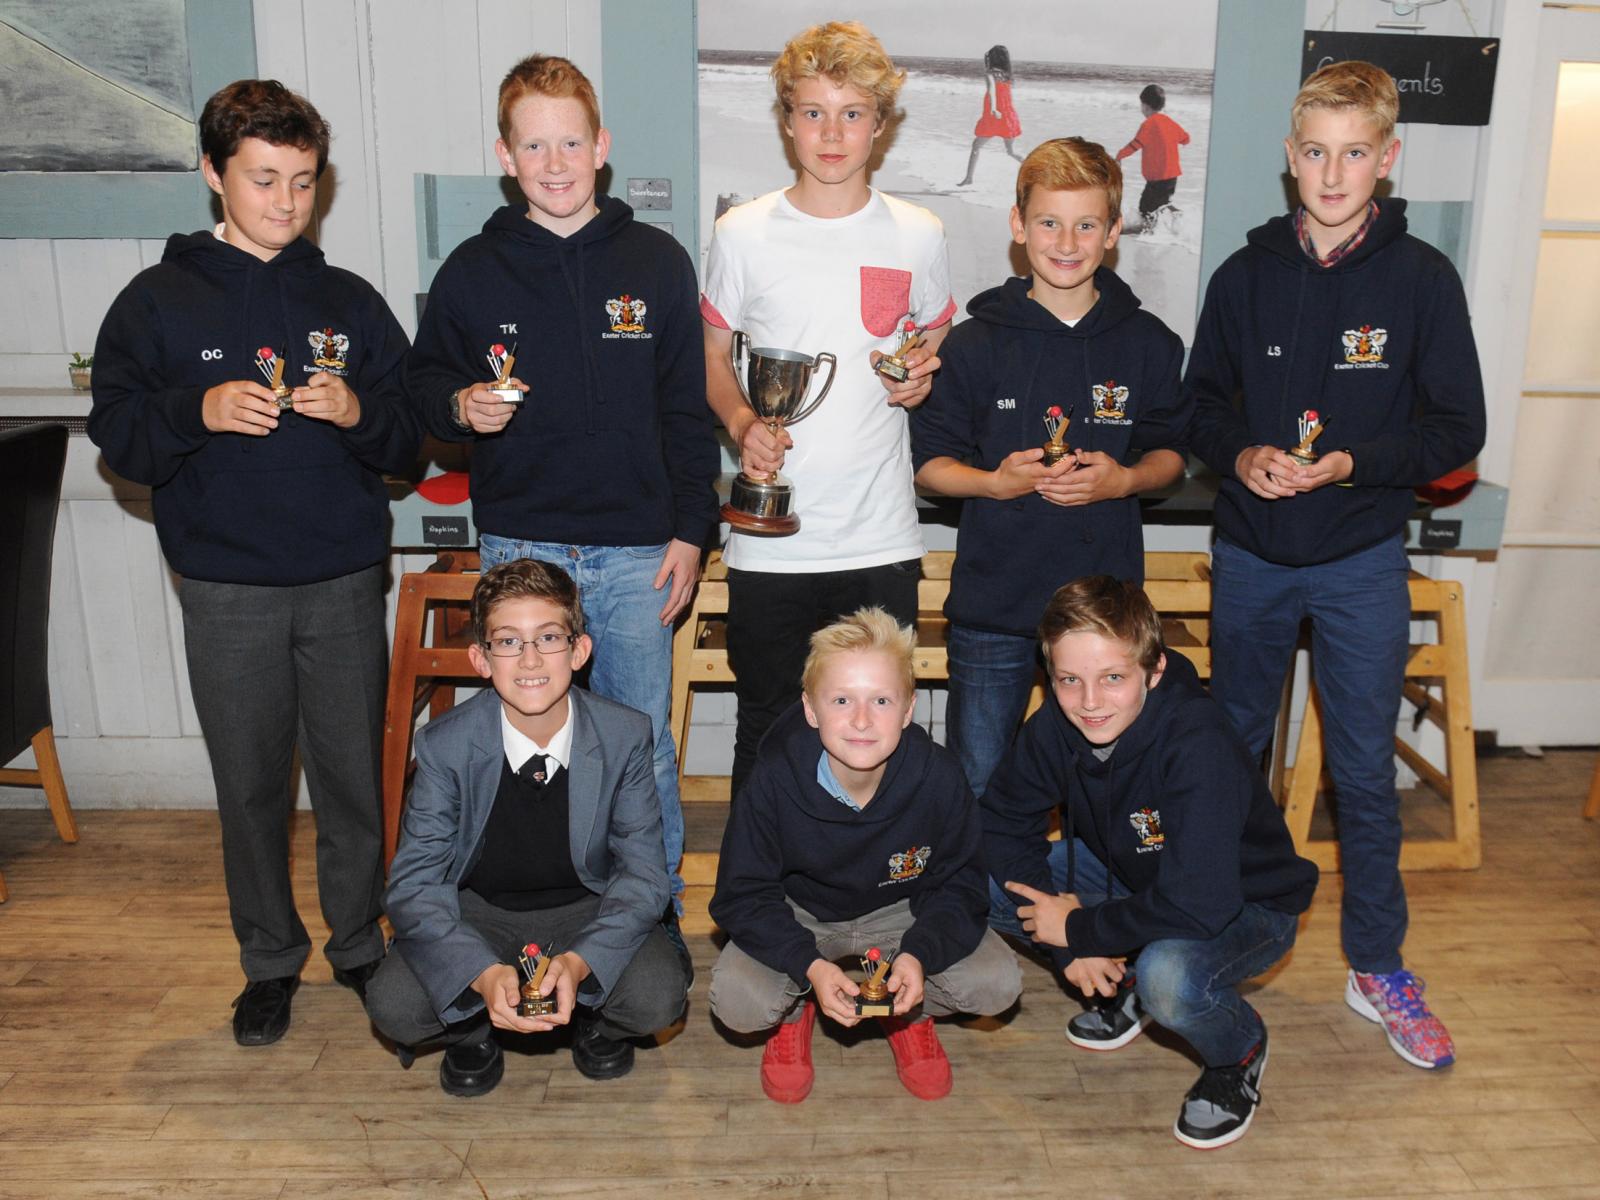 Exeter U13s proudly displaying the EDYL U13 divisional trophy